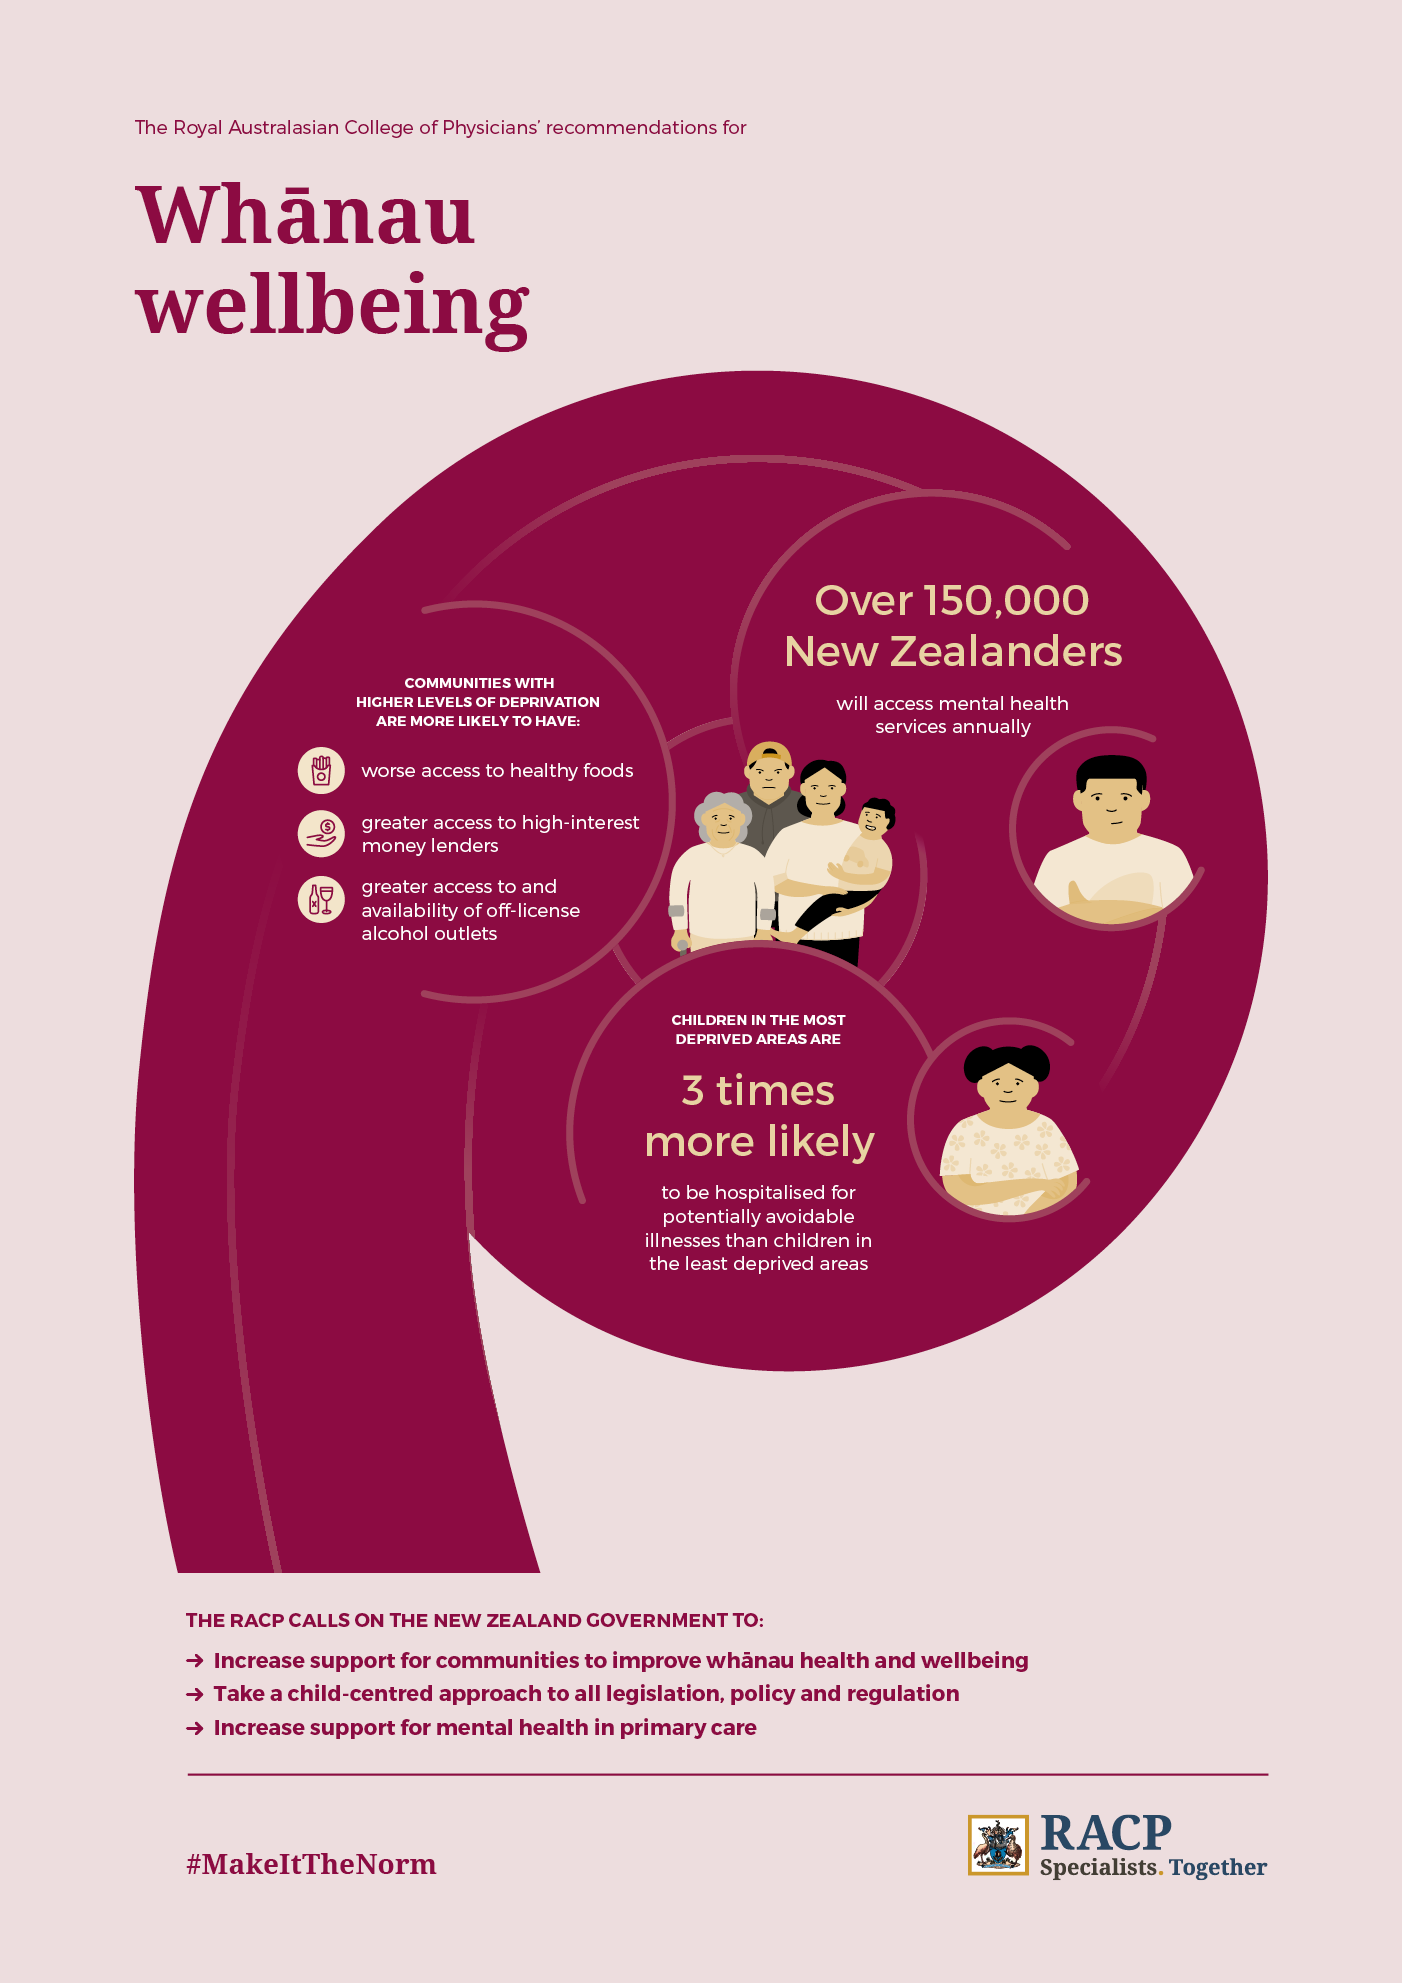 Campaign poster that shows the College's recommendations for whānau wellbeing